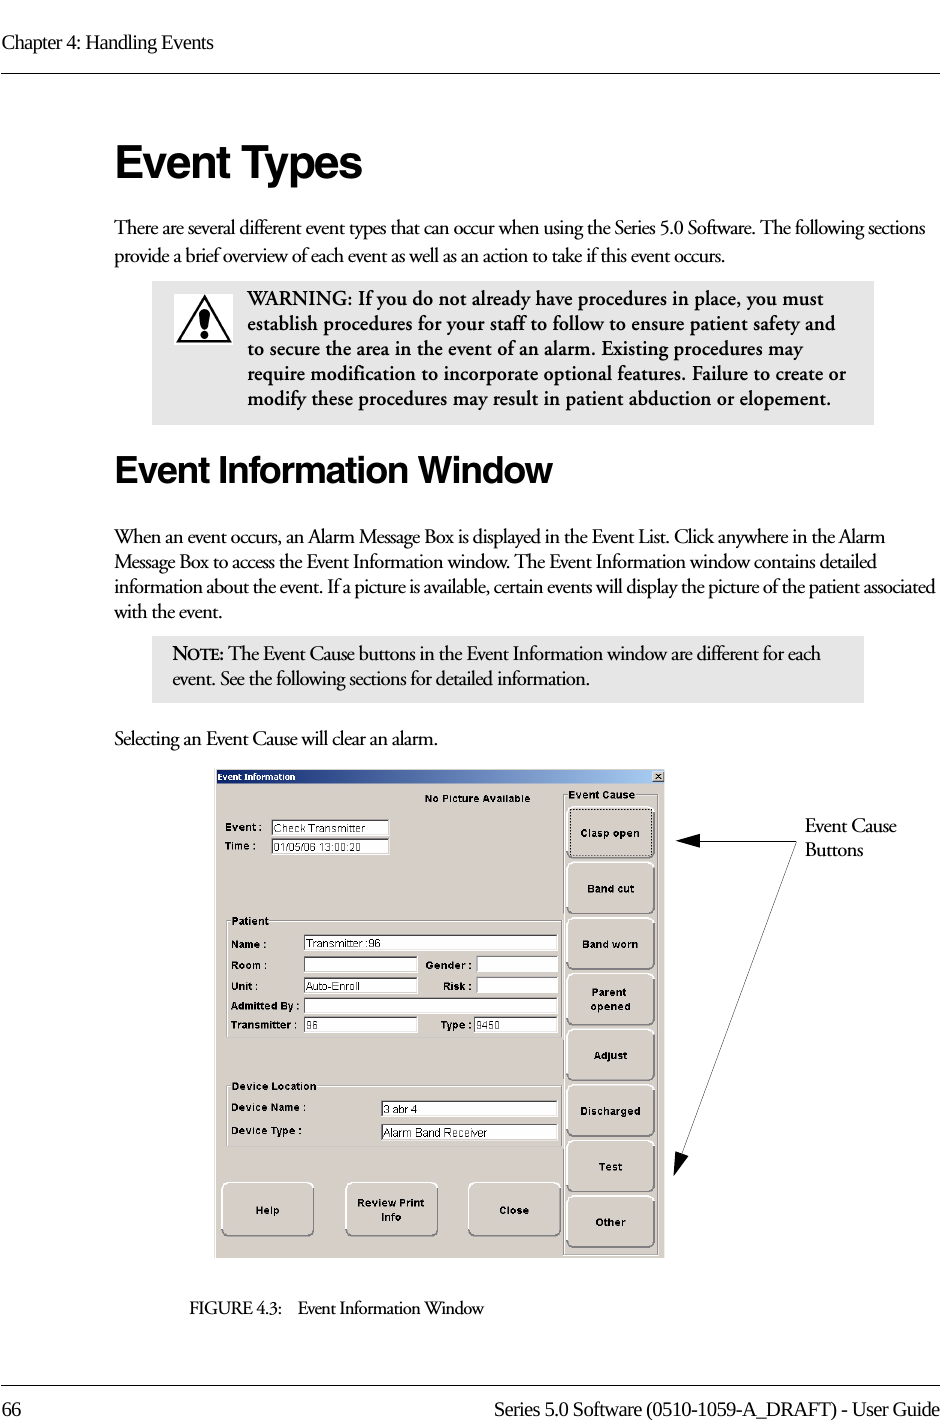 Chapter 4: Handling Events66 Series 5.0 Software (0510-1059-A_DRAFT) - User GuideEvent TypesThere are several different event types that can occur when using the Series 5.0 Software. The following sections provide a brief overview of each event as well as an action to take if this event occurs.Event Information WindowWhen an event occurs, an Alarm Message Box is displayed in the Event List. Click anywhere in the Alarm Message Box to access the Event Information window. The Event Information window contains detailed information about the event. If a picture is available, certain events will display the picture of the patient associated with the event. Selecting an Event Cause will clear an alarm.FIGURE 4.3:    Event Information WindowWARNING: If you do not already have procedures in place, you must establish procedures for your staff to follow to ensure patient safety and to secure the area in the event of an alarm. Existing procedures may require modification to incorporate optional features. Failure to create or modify these procedures may result in patient abduction or elopement. NOTE: The Event Cause buttons in the Event Information window are different for each event. See the following sections for detailed information. Event Cause Buttons